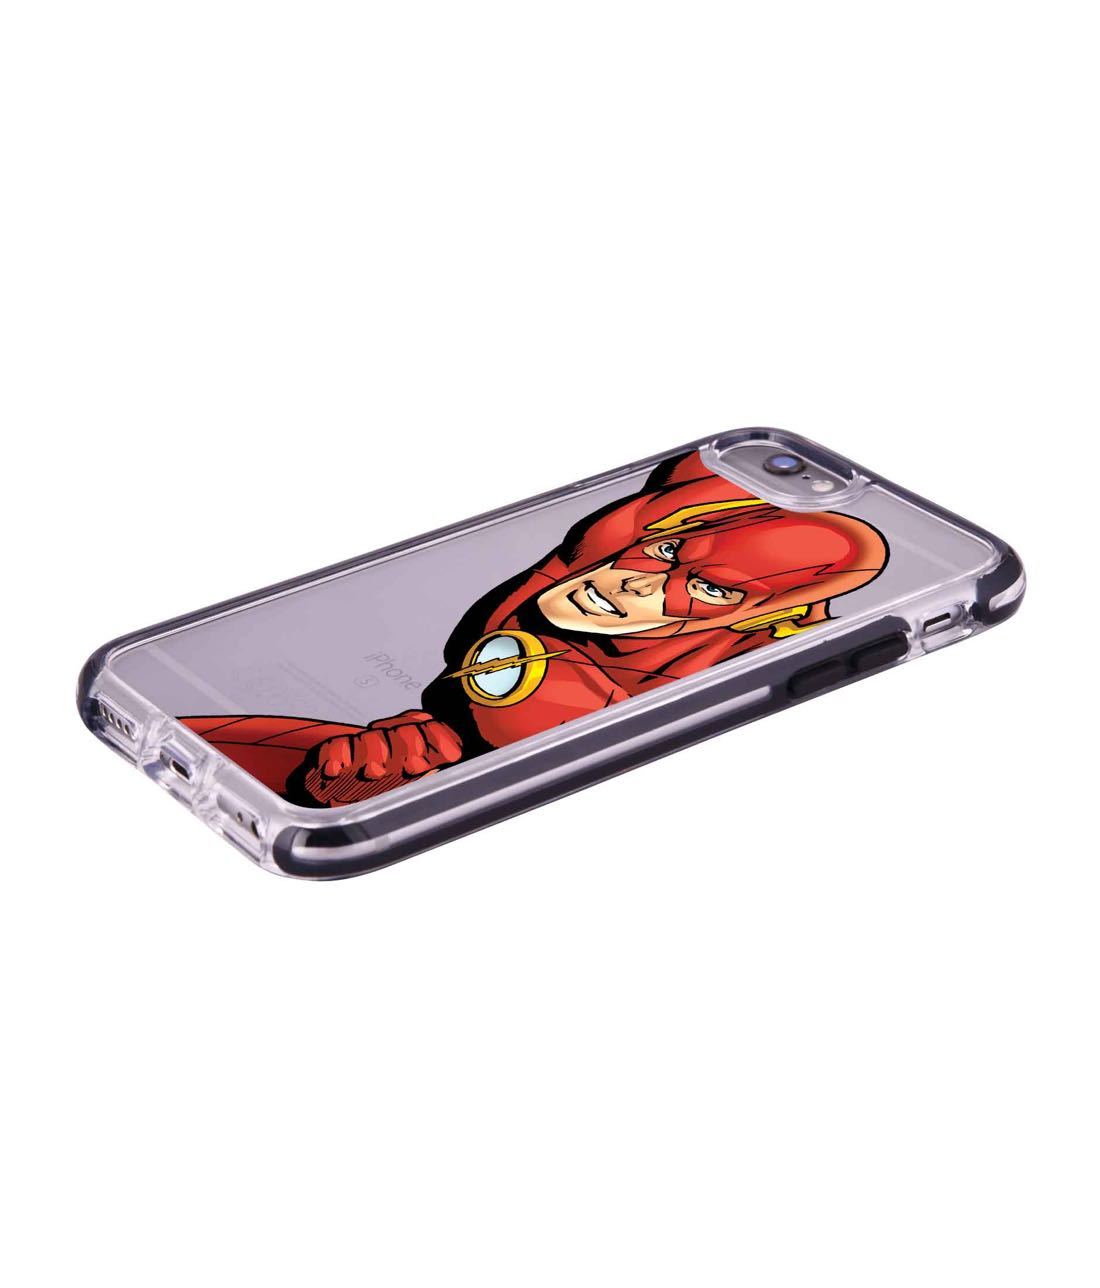 Fierce Flash - Extreme Phone Case for iPhone 6S